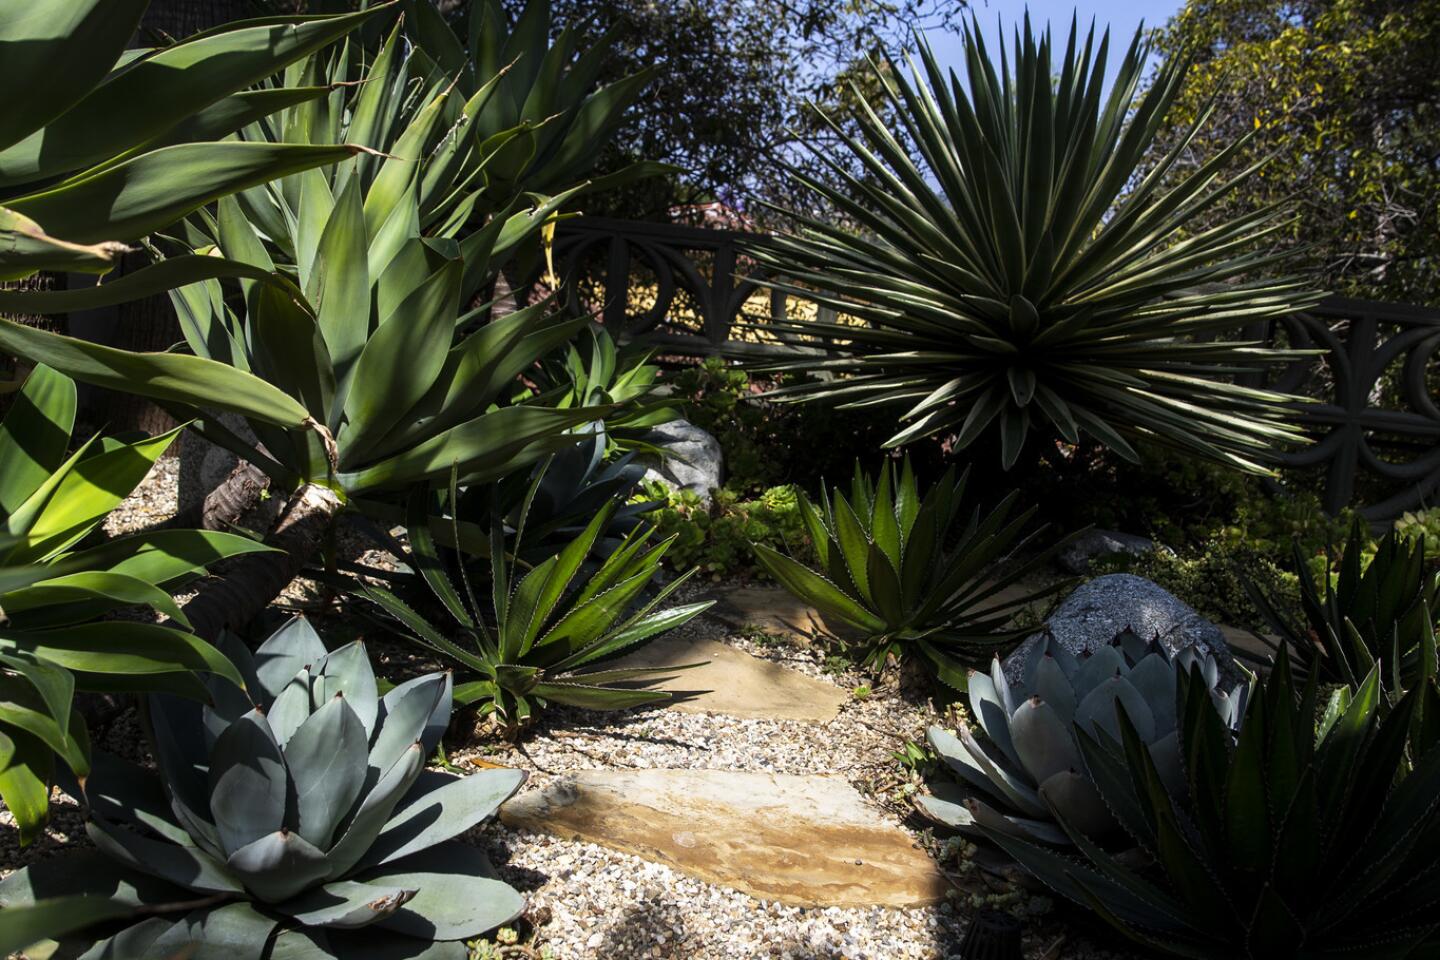 A new drought-friendly garden for their new Mid-century Modern home